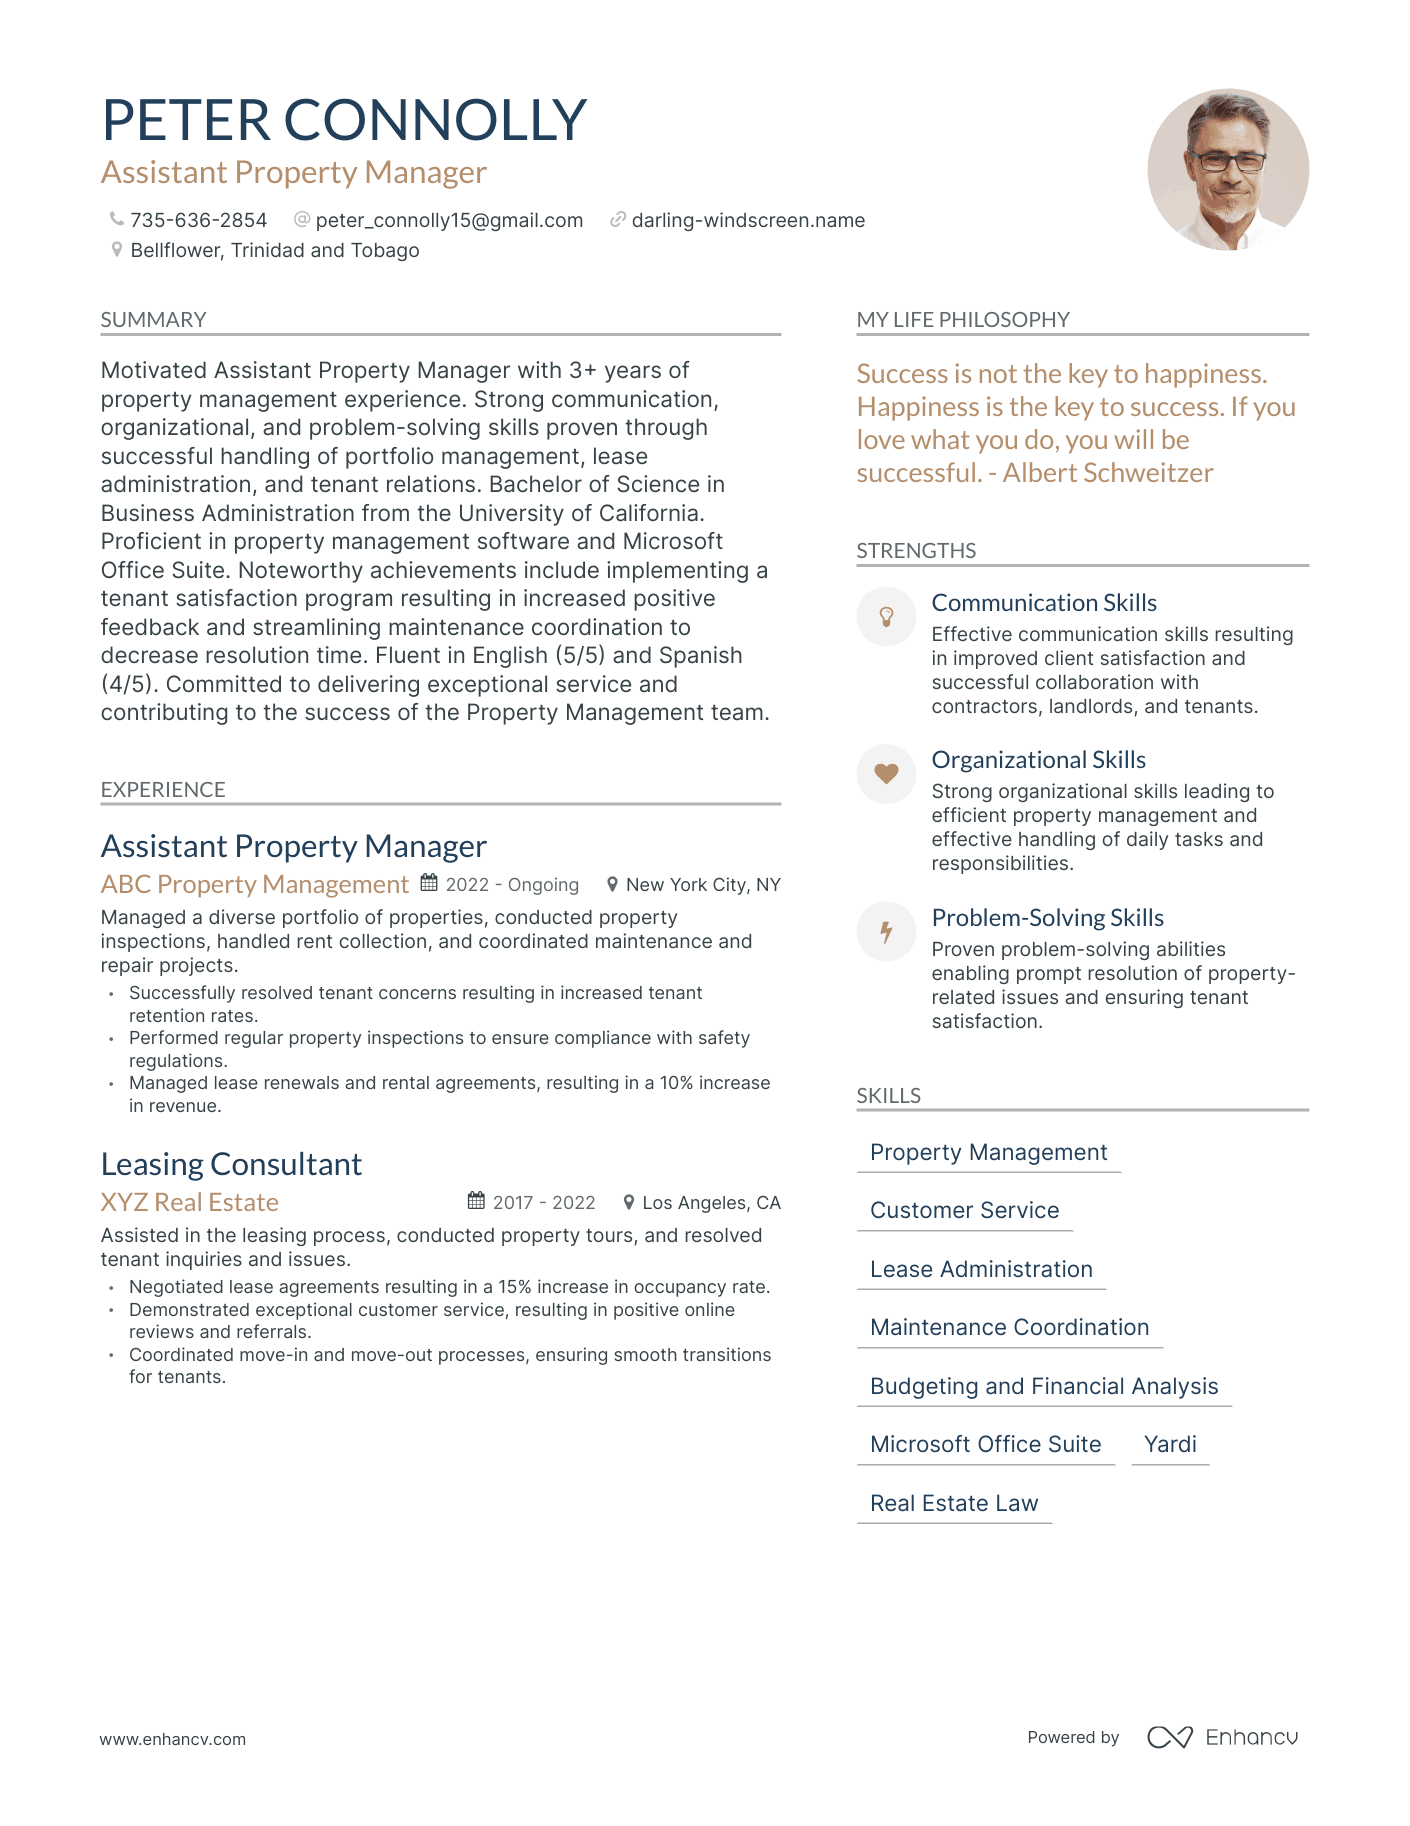 Assistant Property Manager resume example